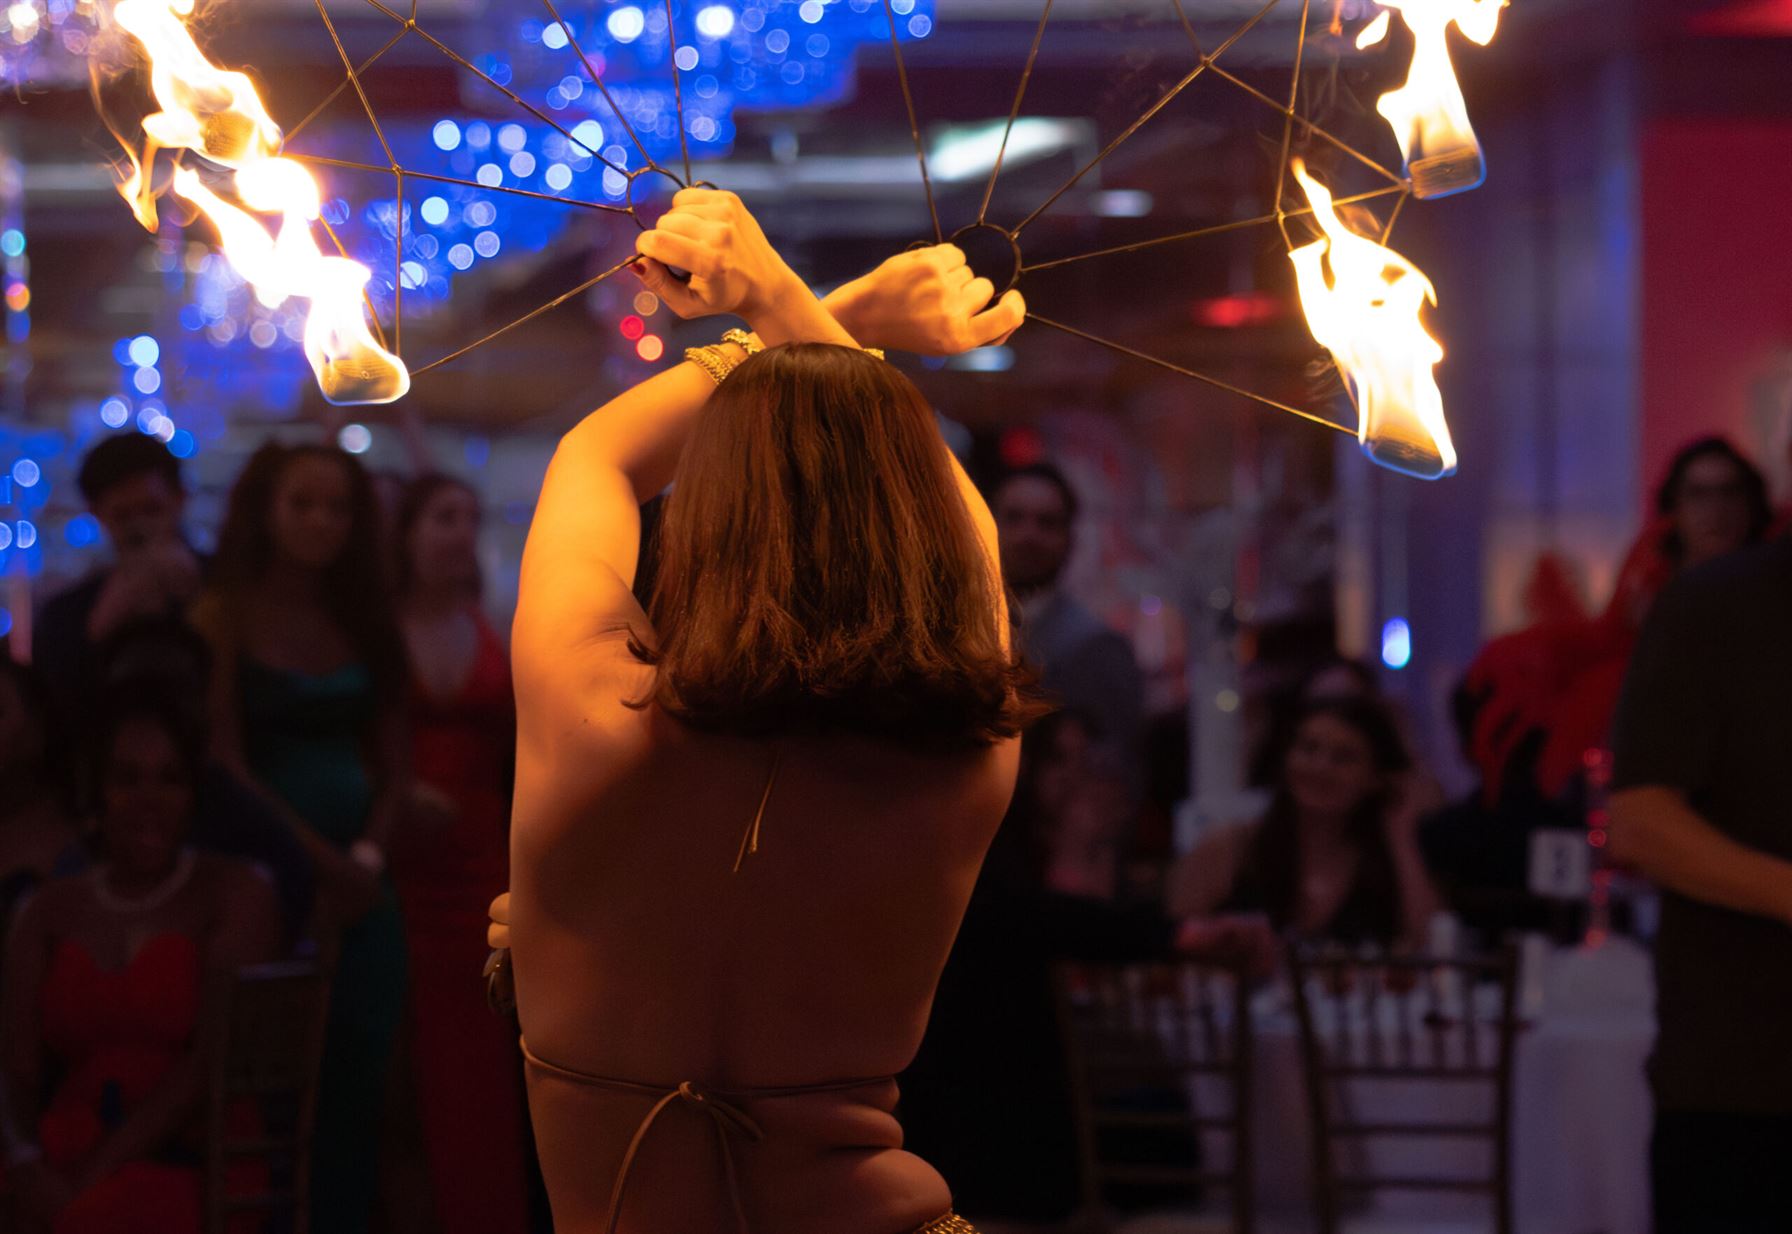 A professional fire dancer performs at the gala as students gather around. Photo by Victoria Howell